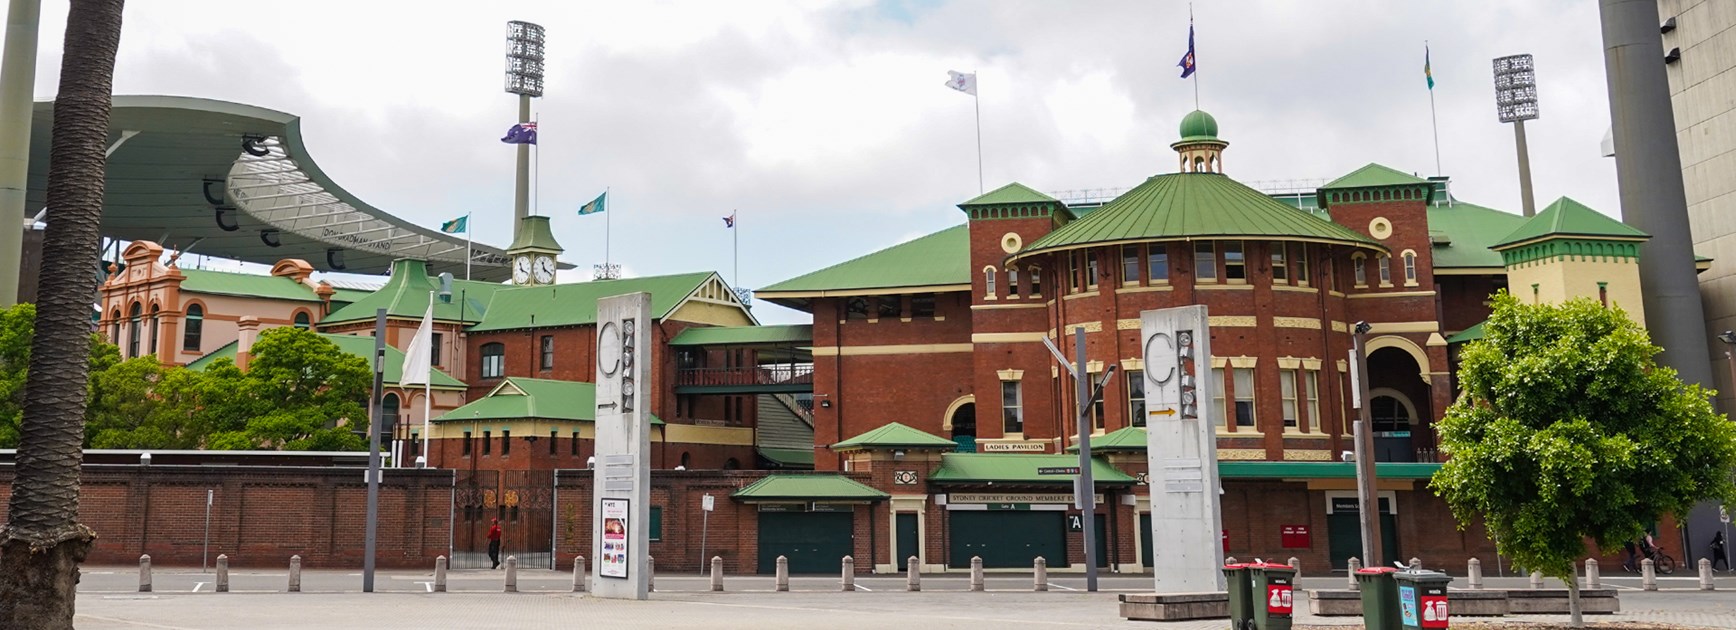 SCG Confirmed As Venue For 2019 NRL Touch Grand Final